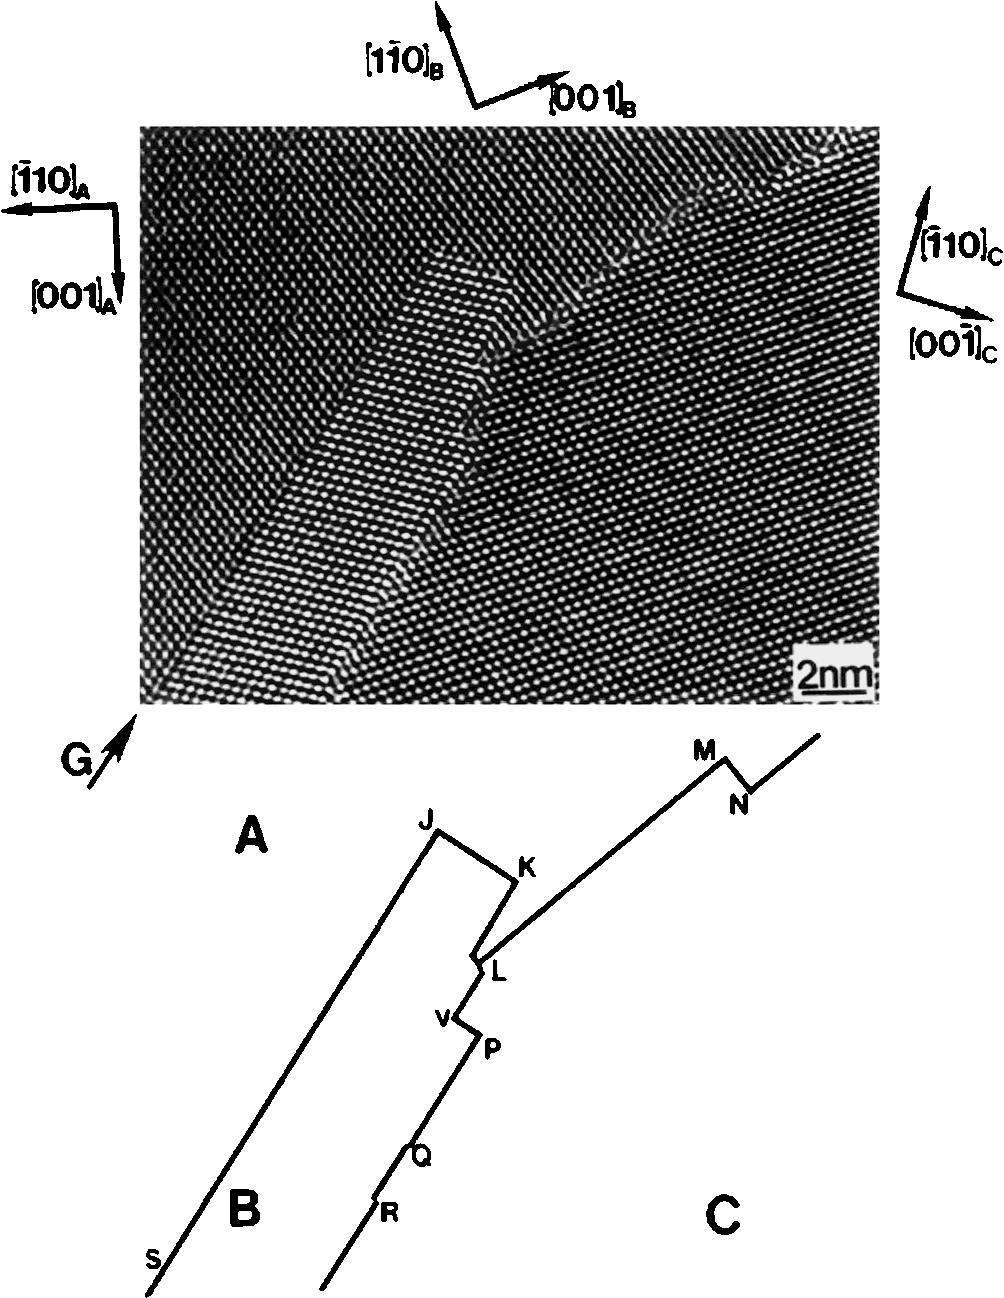 Jpn. J. Appl. Phys. Vol. 40 (2001) Pt. 1, No. 7 N.-H. CHO and C. B. CARTER 4461 Fig. 6. High-resolution image of microtwins in a [110] GaAs epilayer.